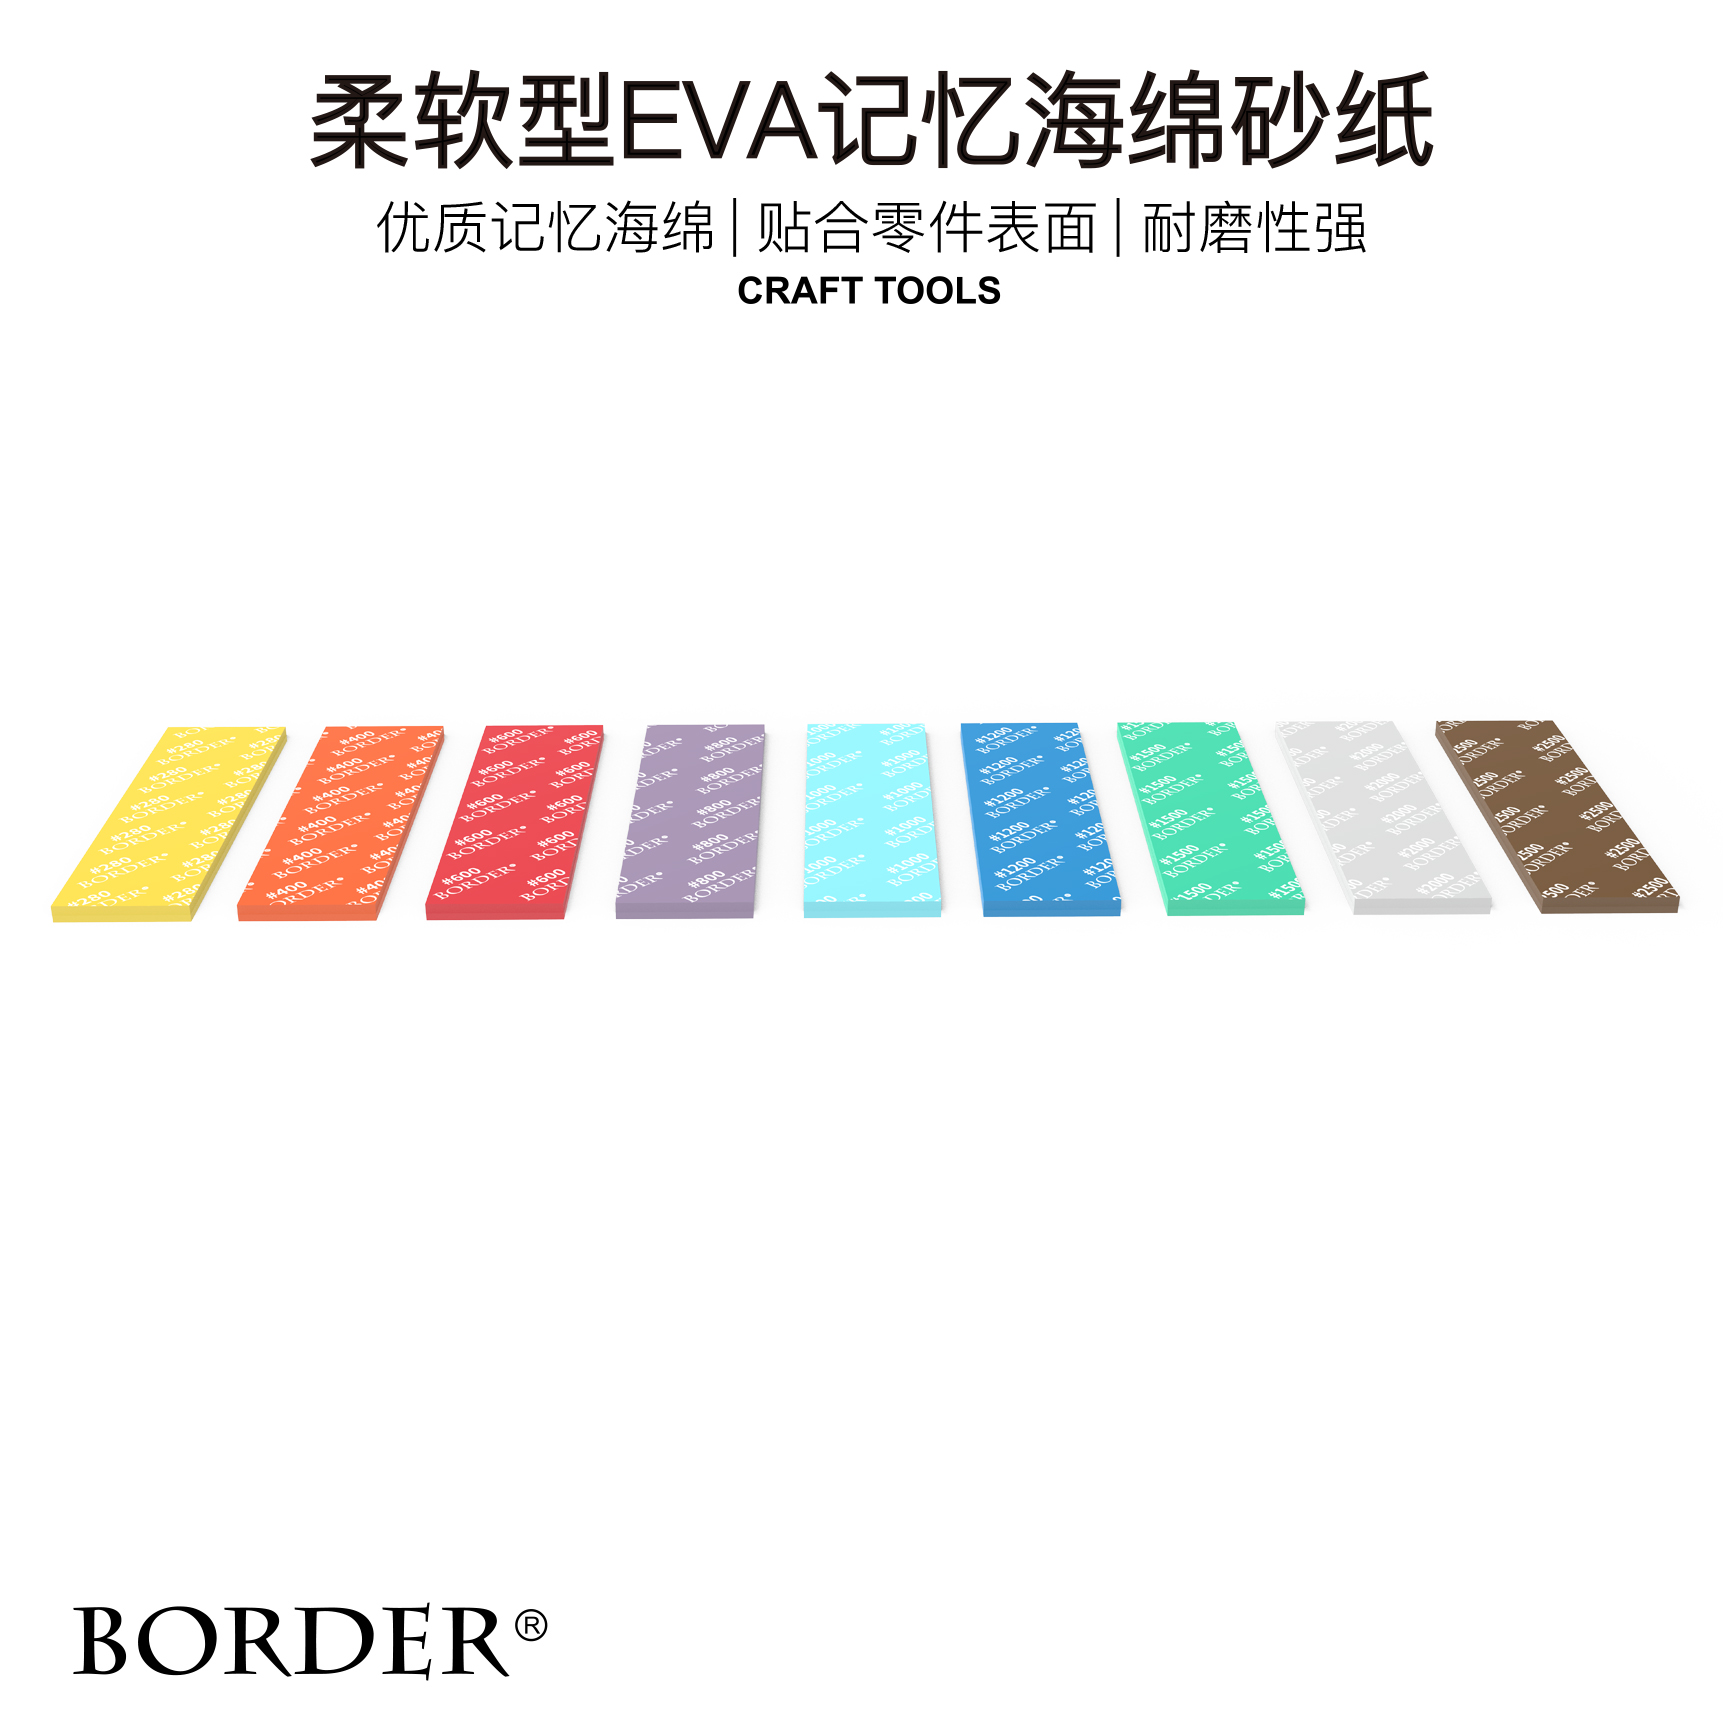 BD0016 Highly durable sandpaper with a thin EVA sponge base(图2)